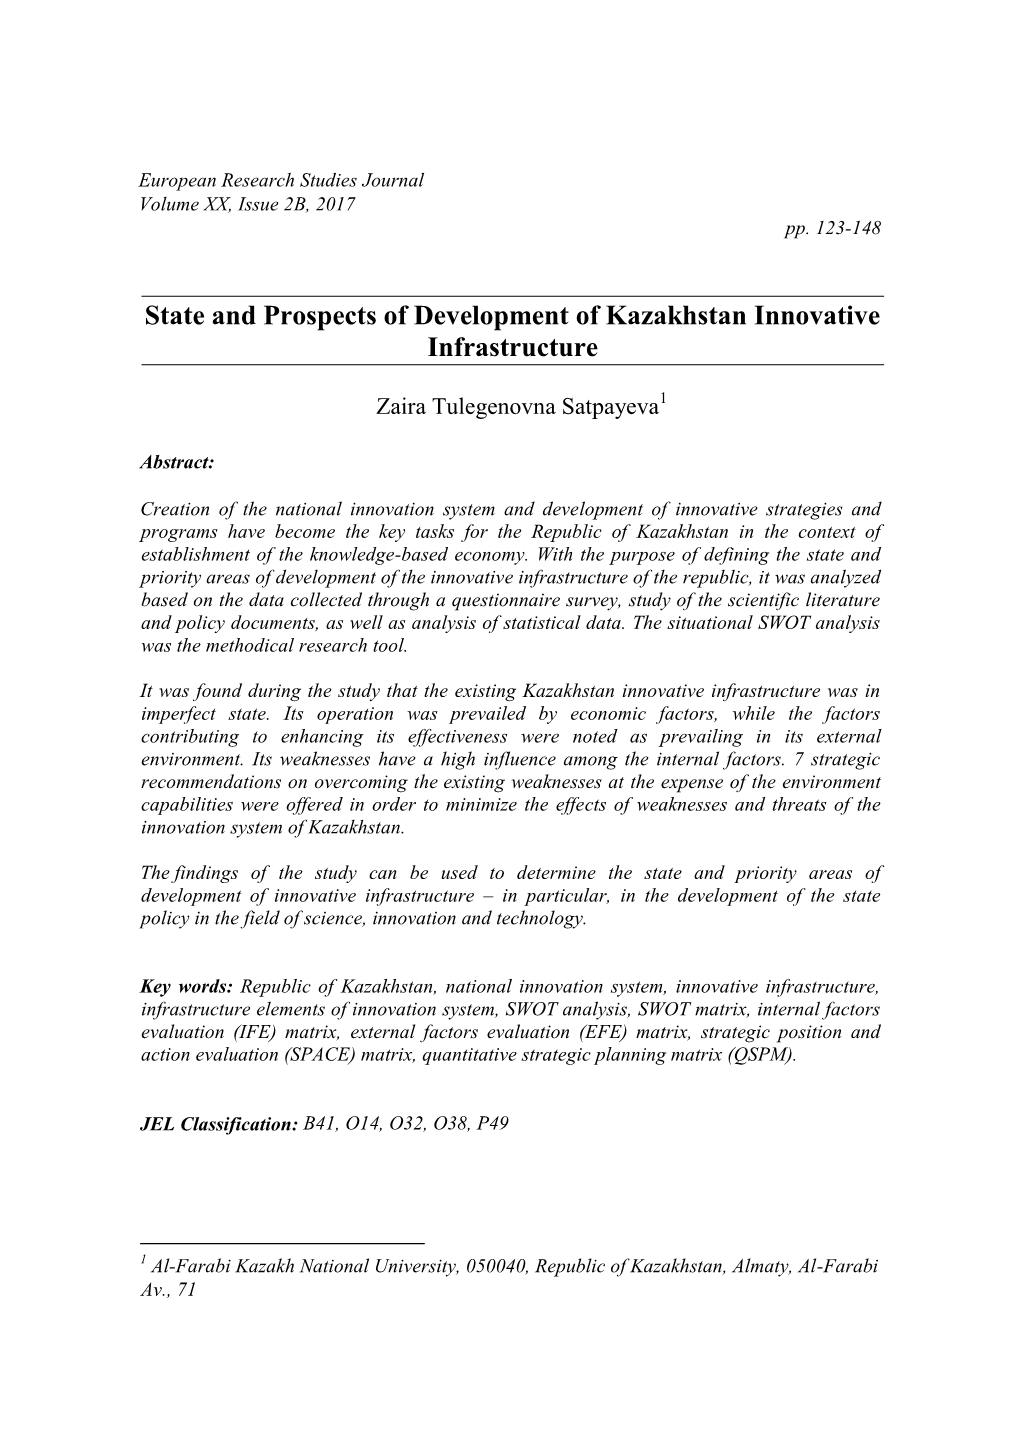 State and Prospects of Development of Kazakhstan Innovative Infrastructure